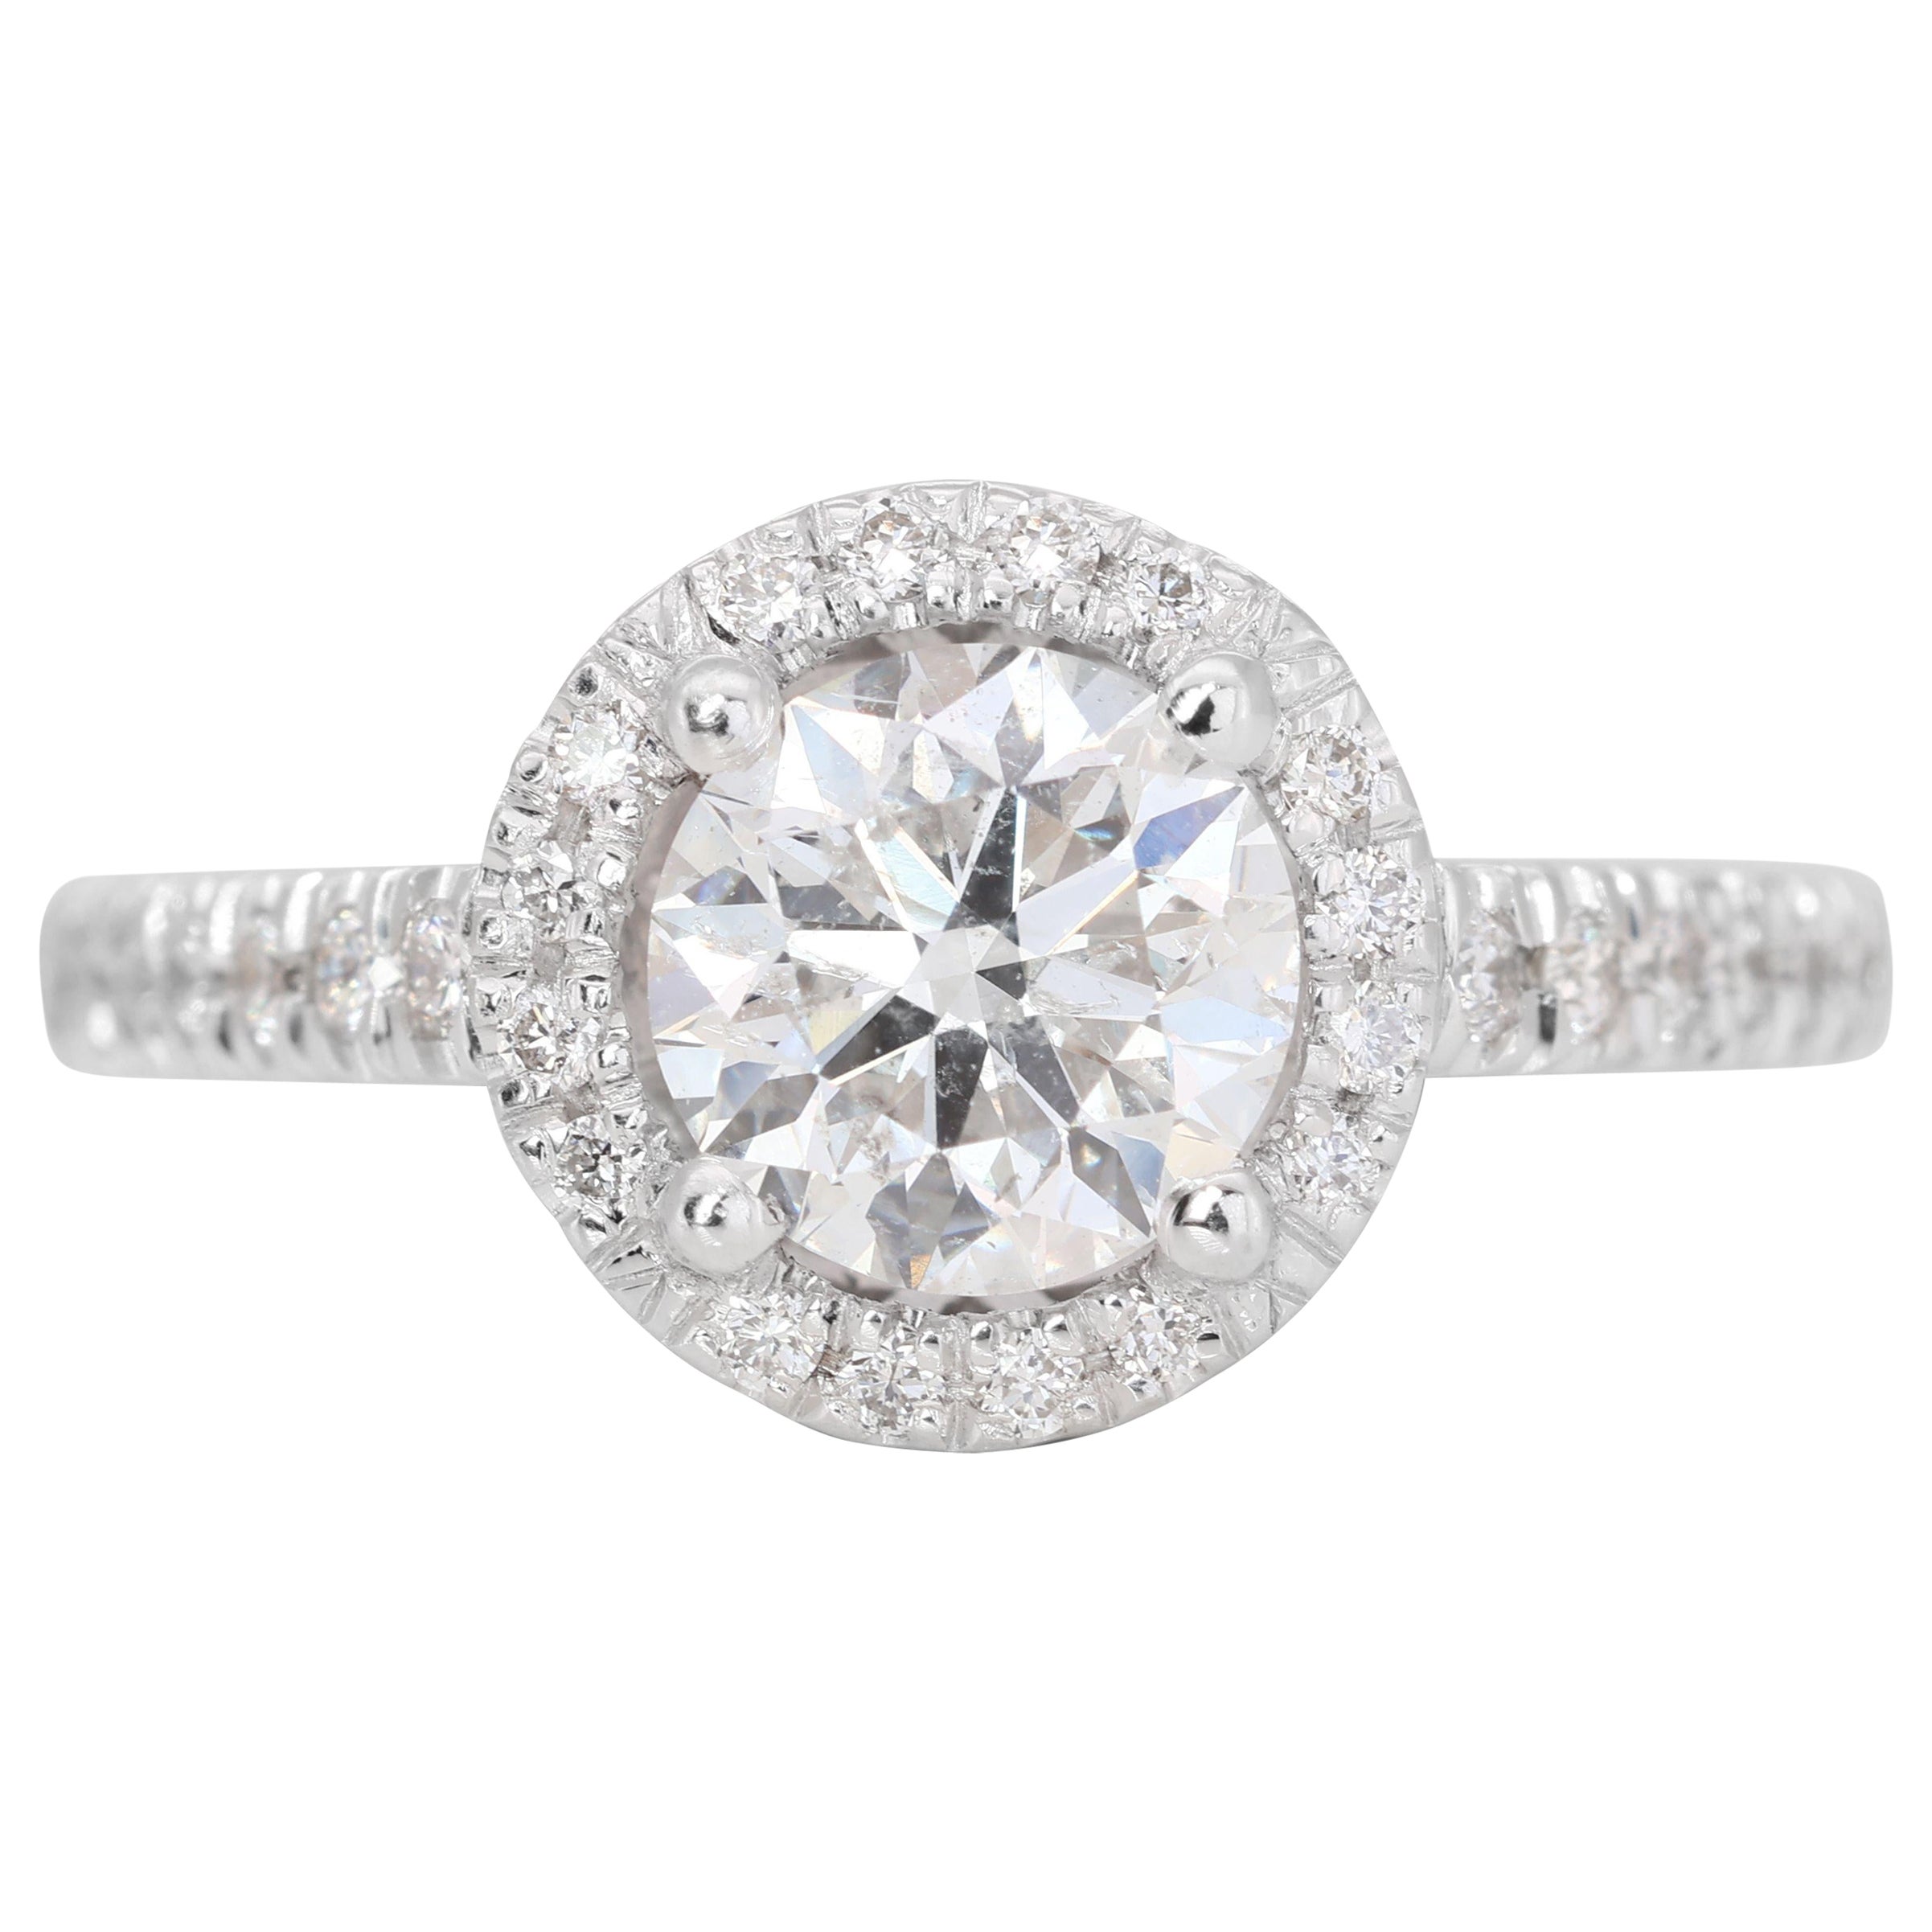 Dazzling 0.70ct Pave Halo Diamond Ring set in 14K White Gold For Sale